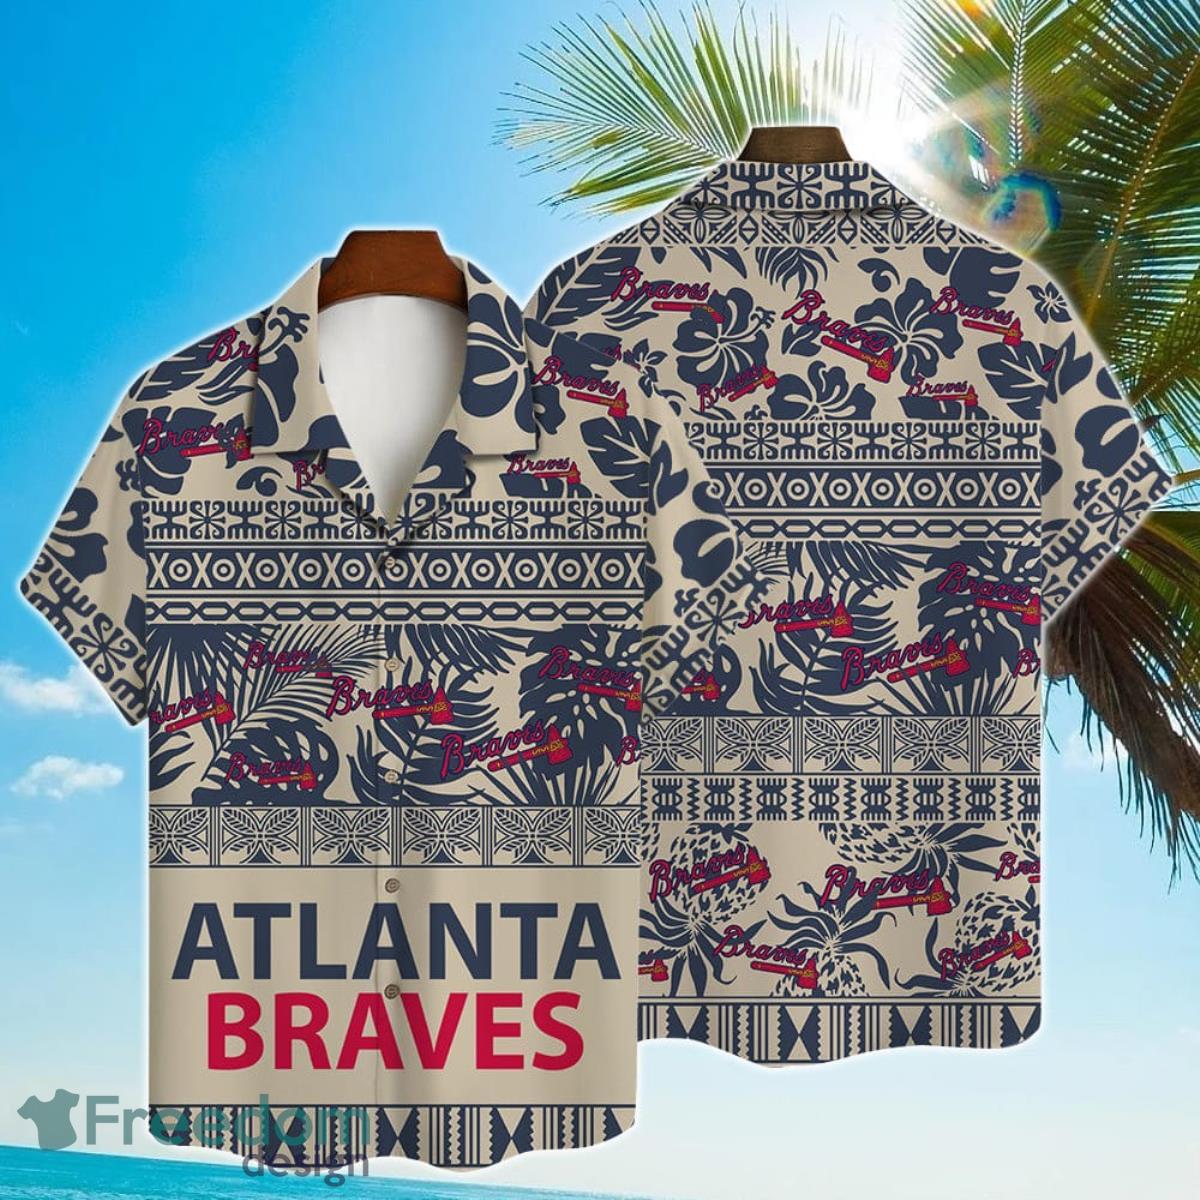 Cleveland Indians MLB Flower Hawaiian Shirt Unique Gift For Real Fans -  Freedomdesign